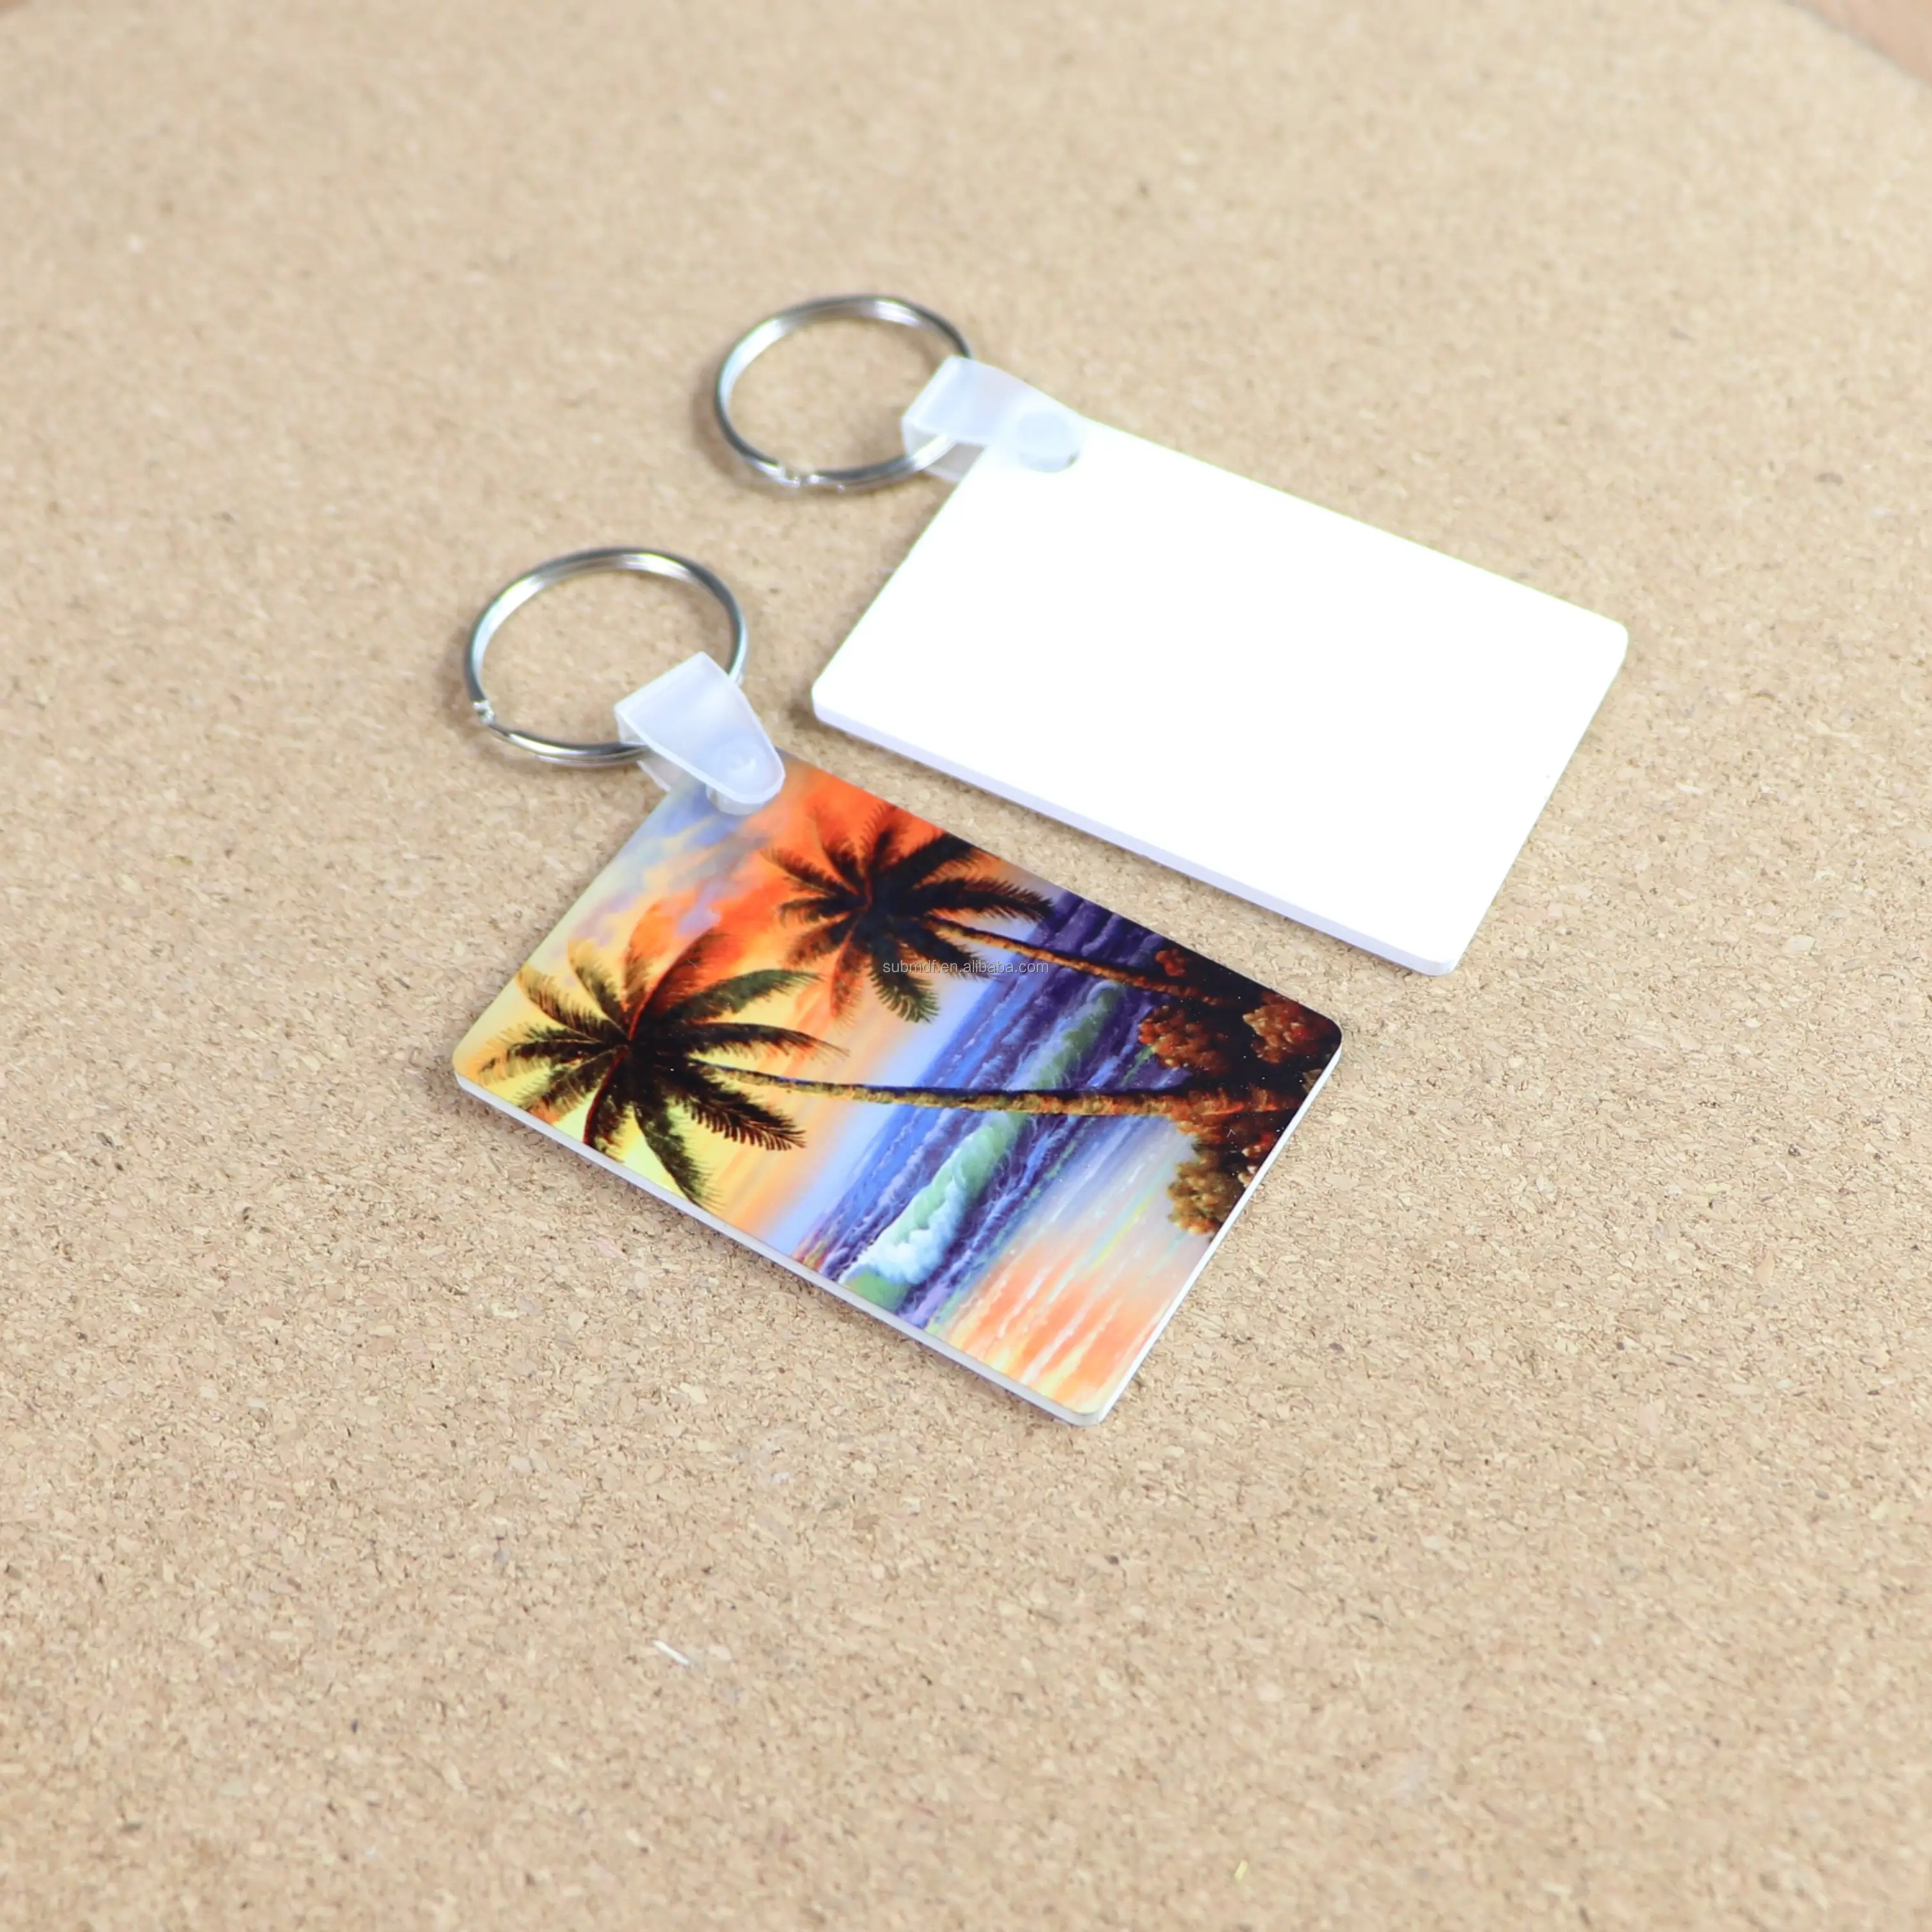 FRP Double-Side Sublimation Blanks Keychains Products Plastic Key Tag Bulk with Rings For Transfer Printing Making DIY Art Craft